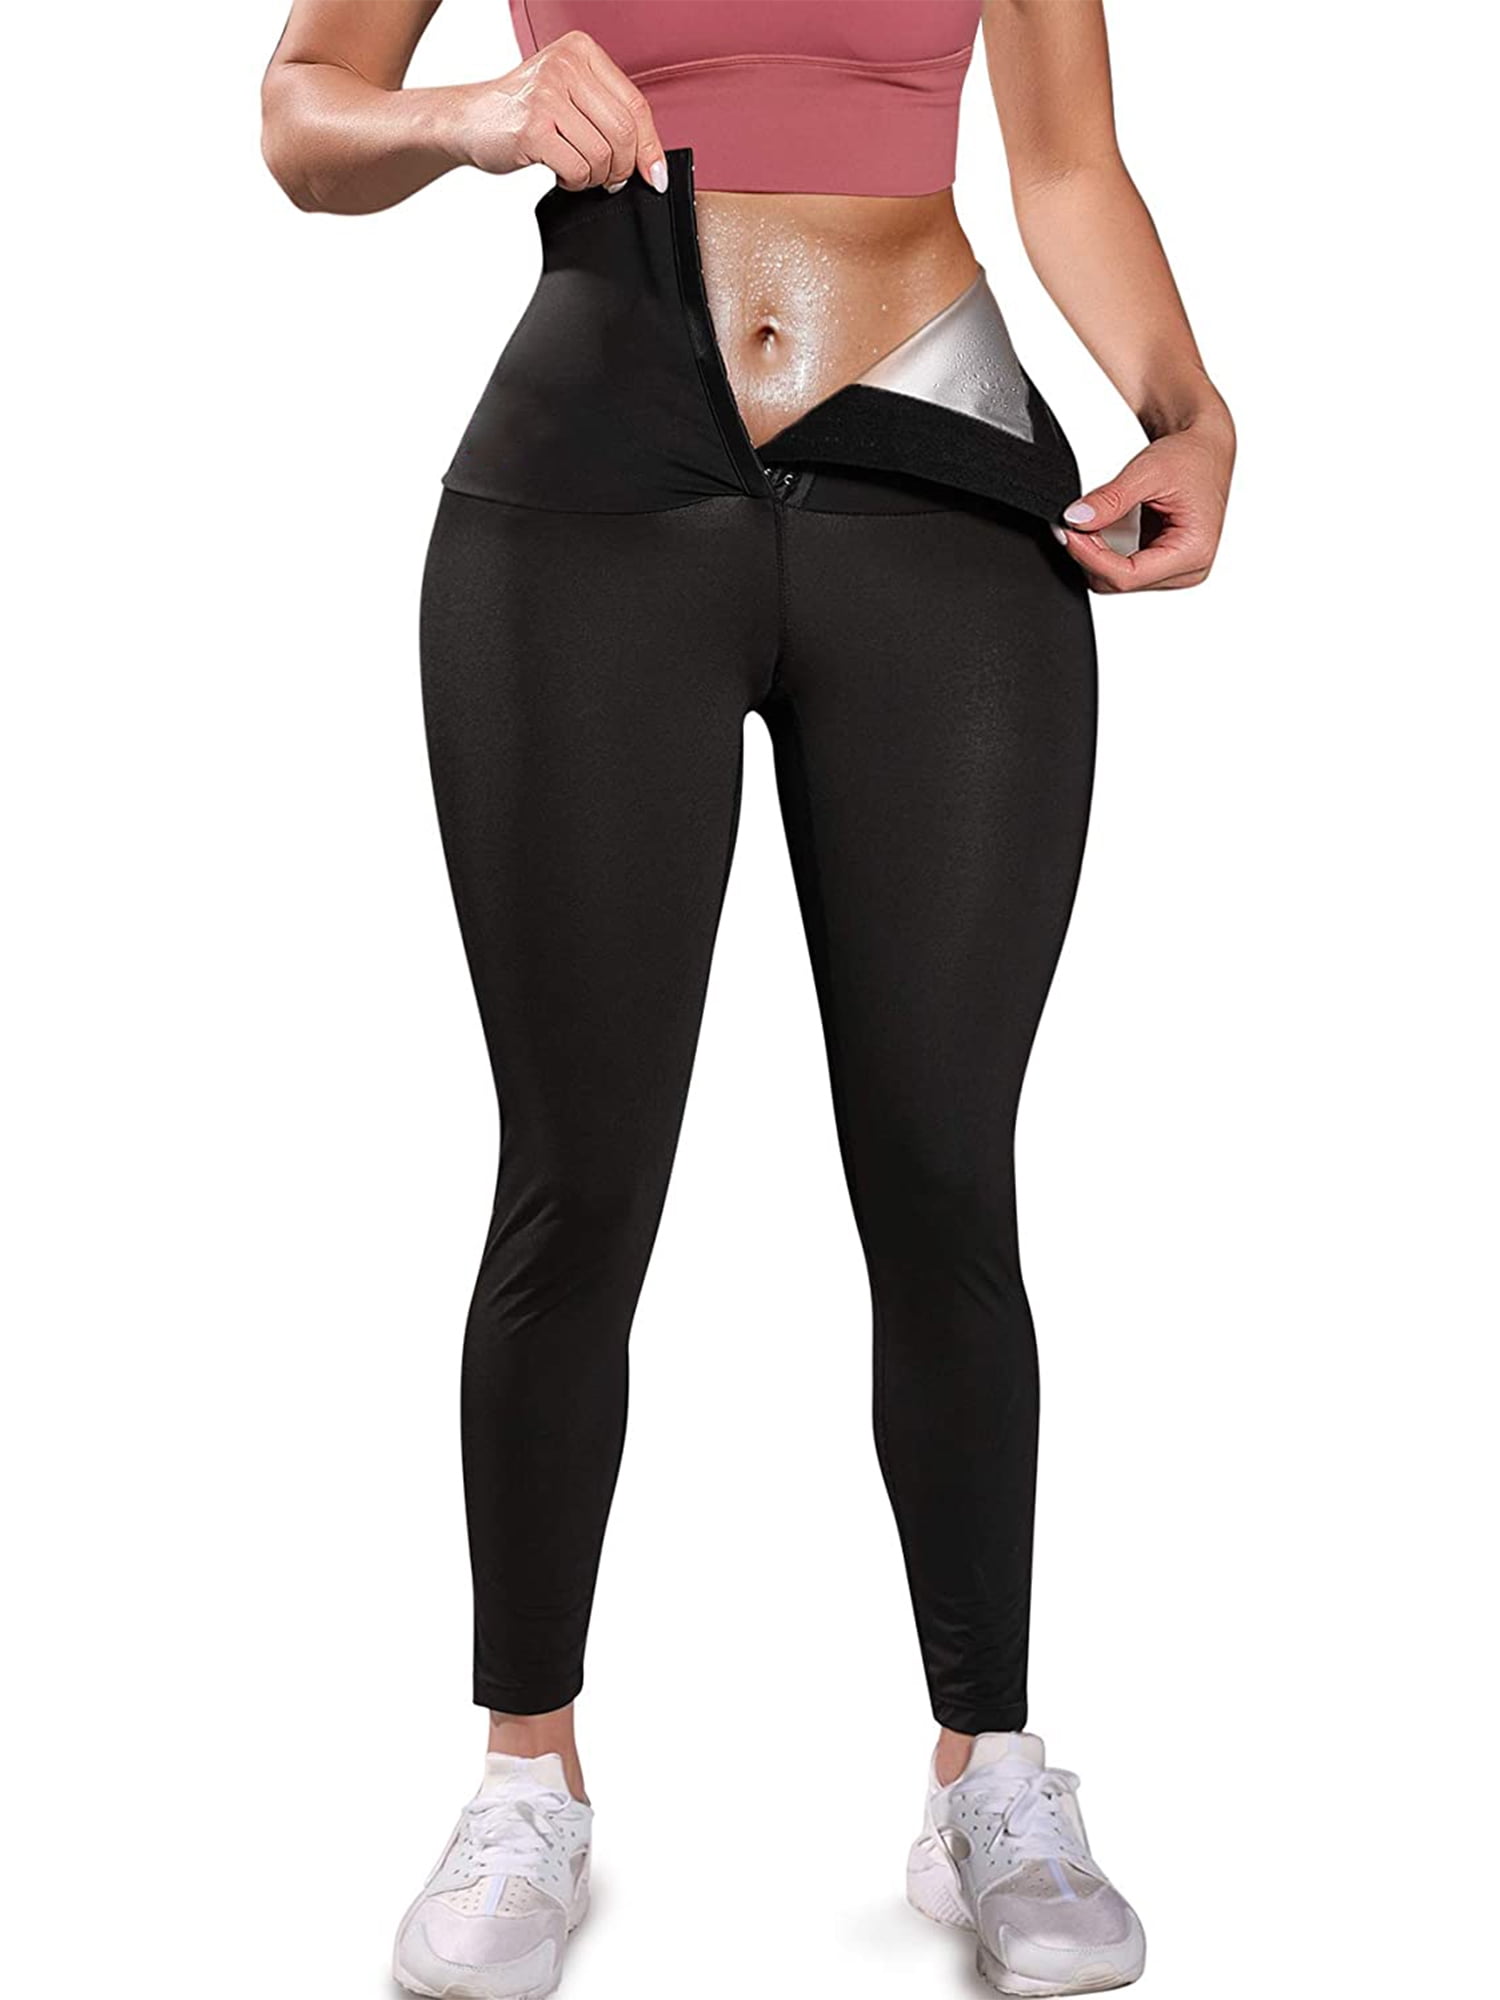 LAZAWG Fat Control Sauna Sweat Pant With Long Waist Trainer Wrap Belt Hot  Sweater Capris For Weight Loss And Body Shaping From Dou02, $18.11